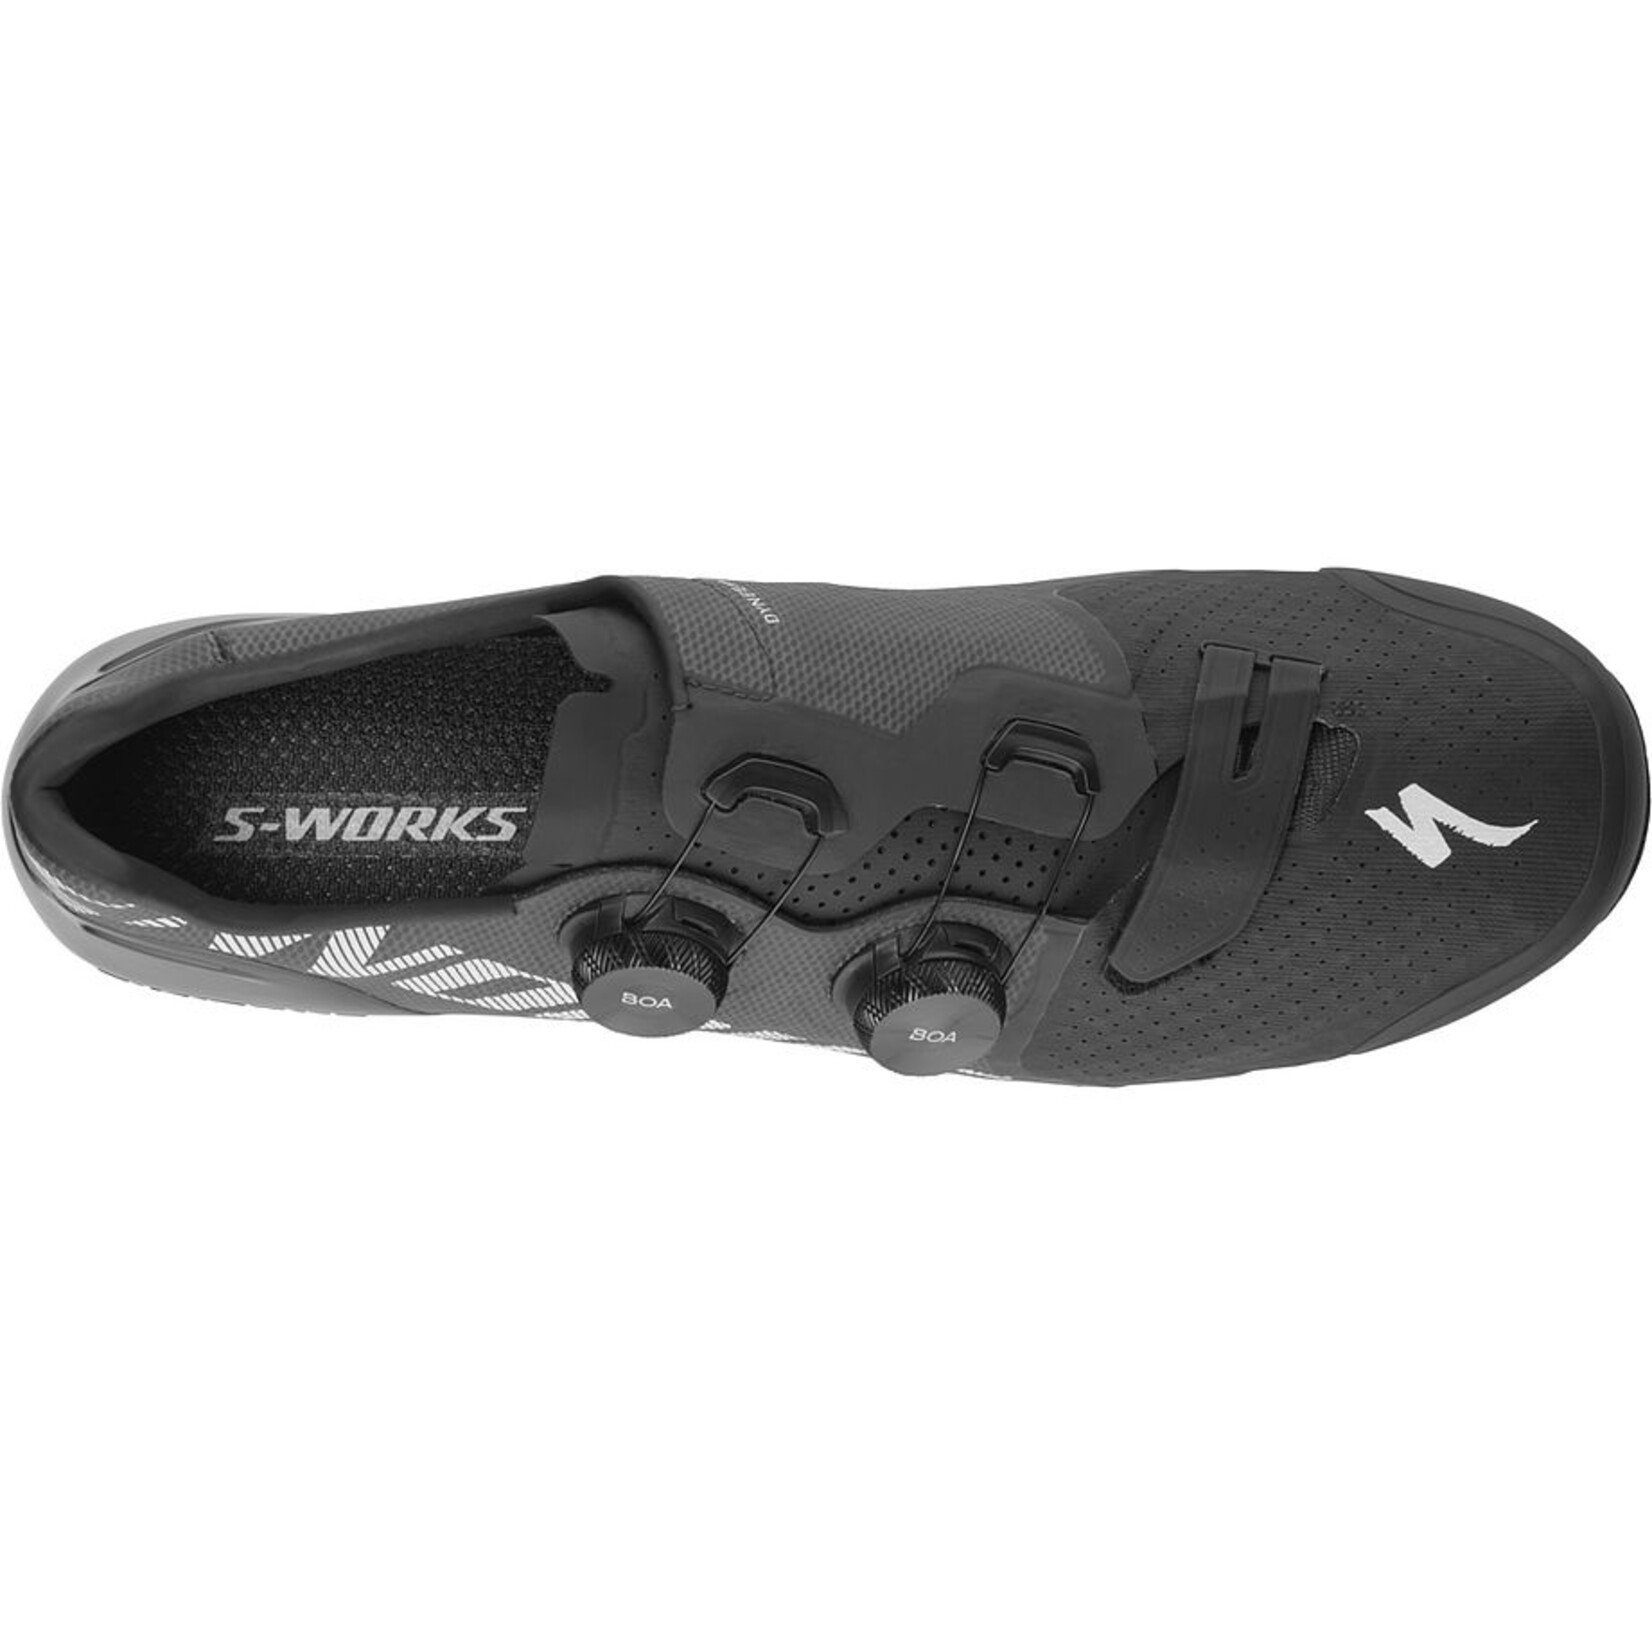 Specialized S-Works Recon Mountain Bike Shoes in Black